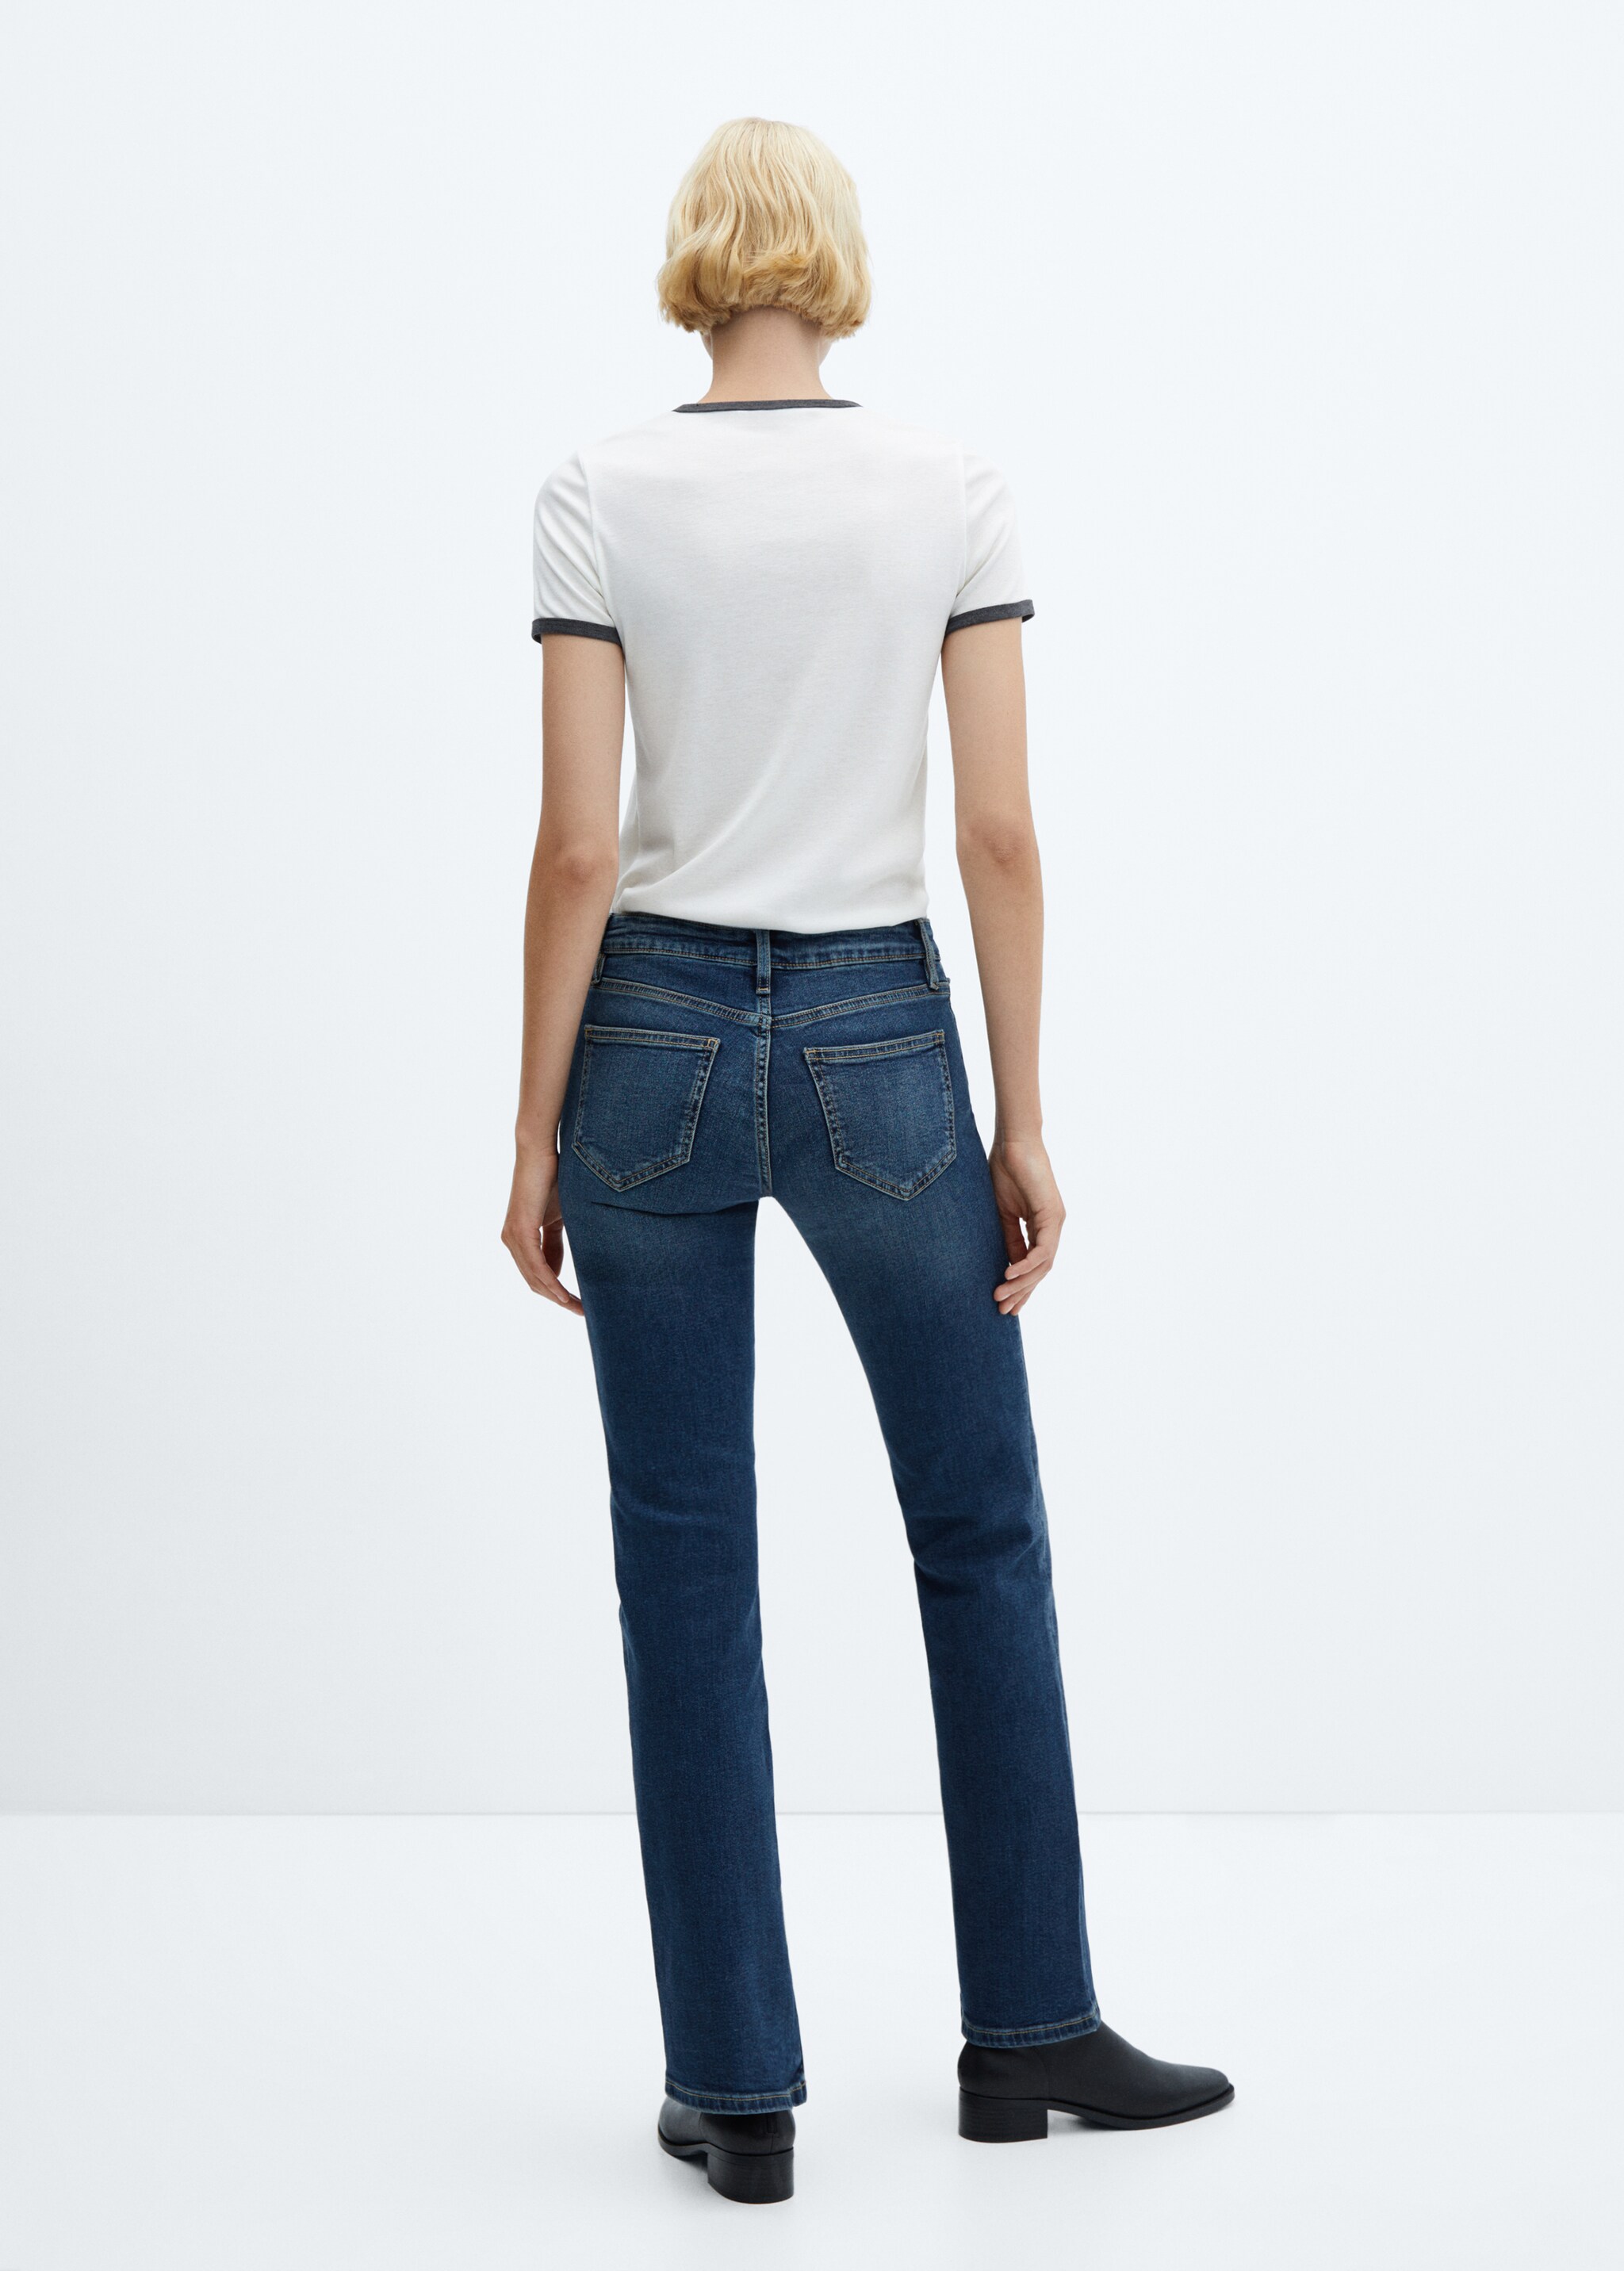 Jeans flare taille basse - Reverse of the article